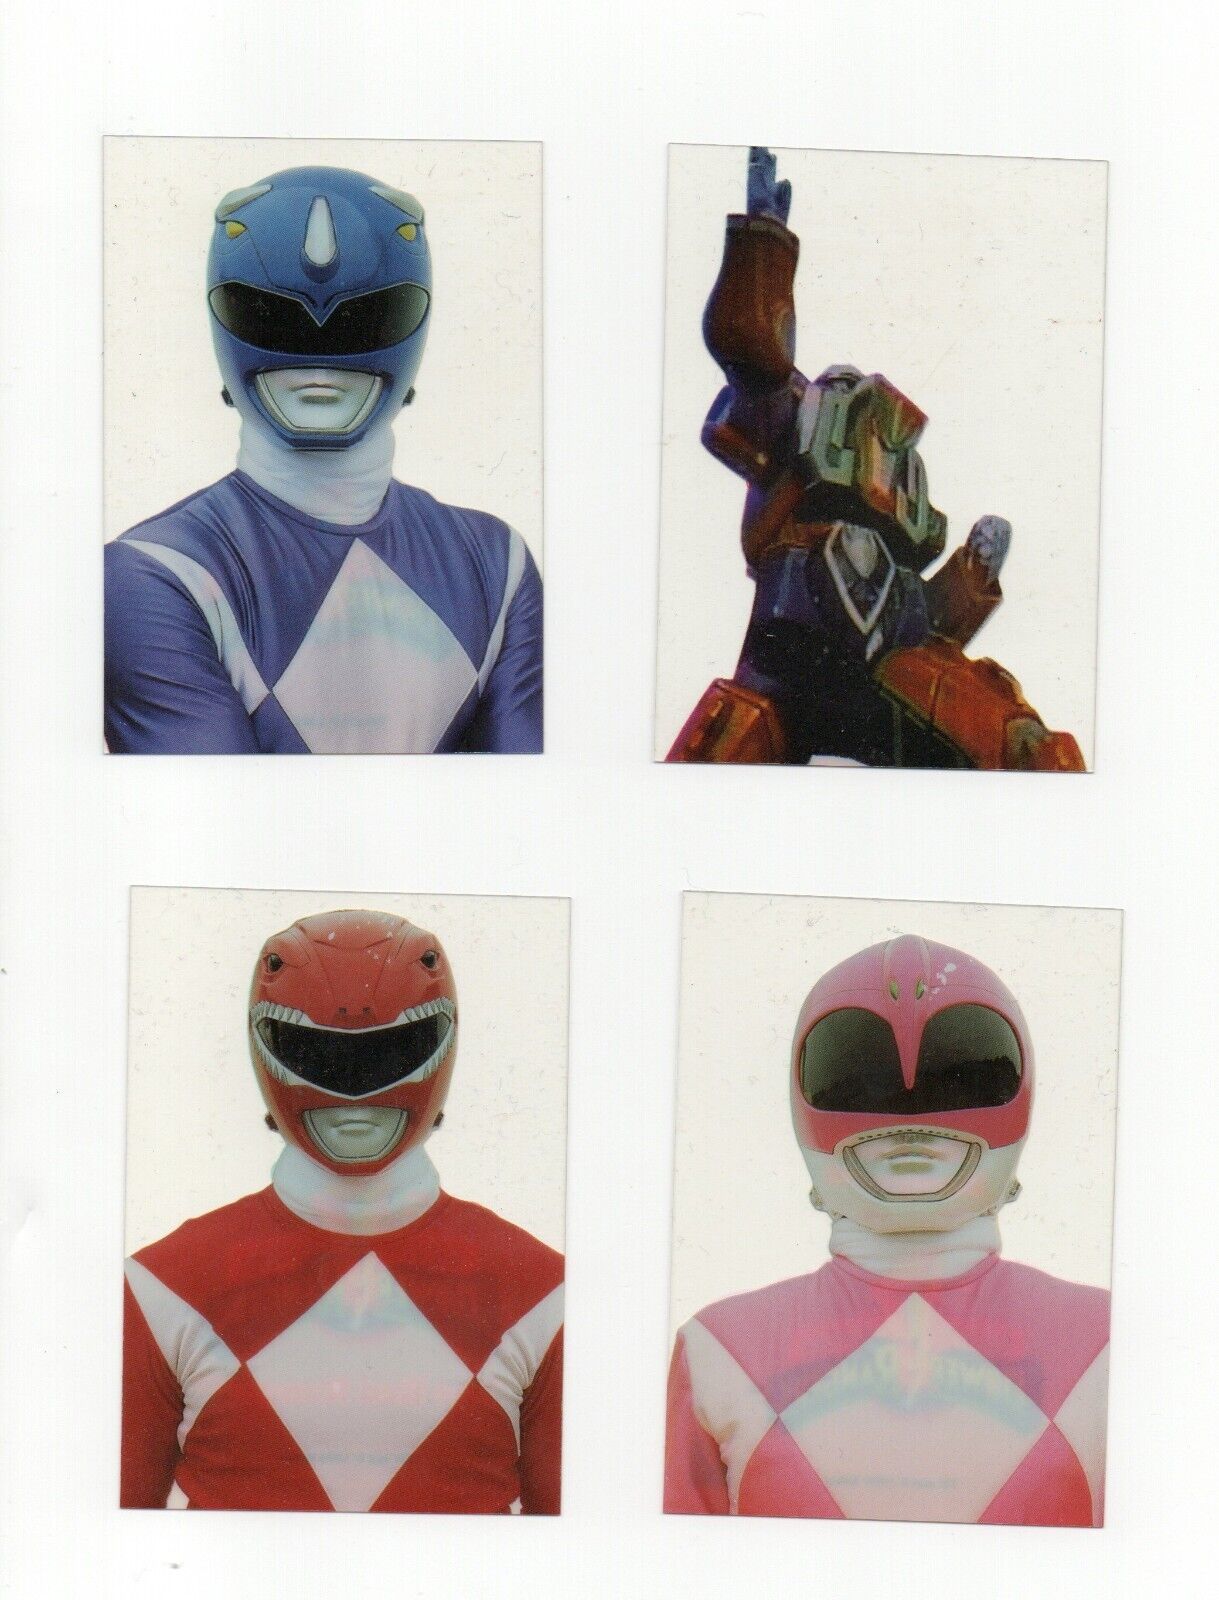 1994 Collect-A-Card Mighty Morphin Power Rangers New Season 4 Cards